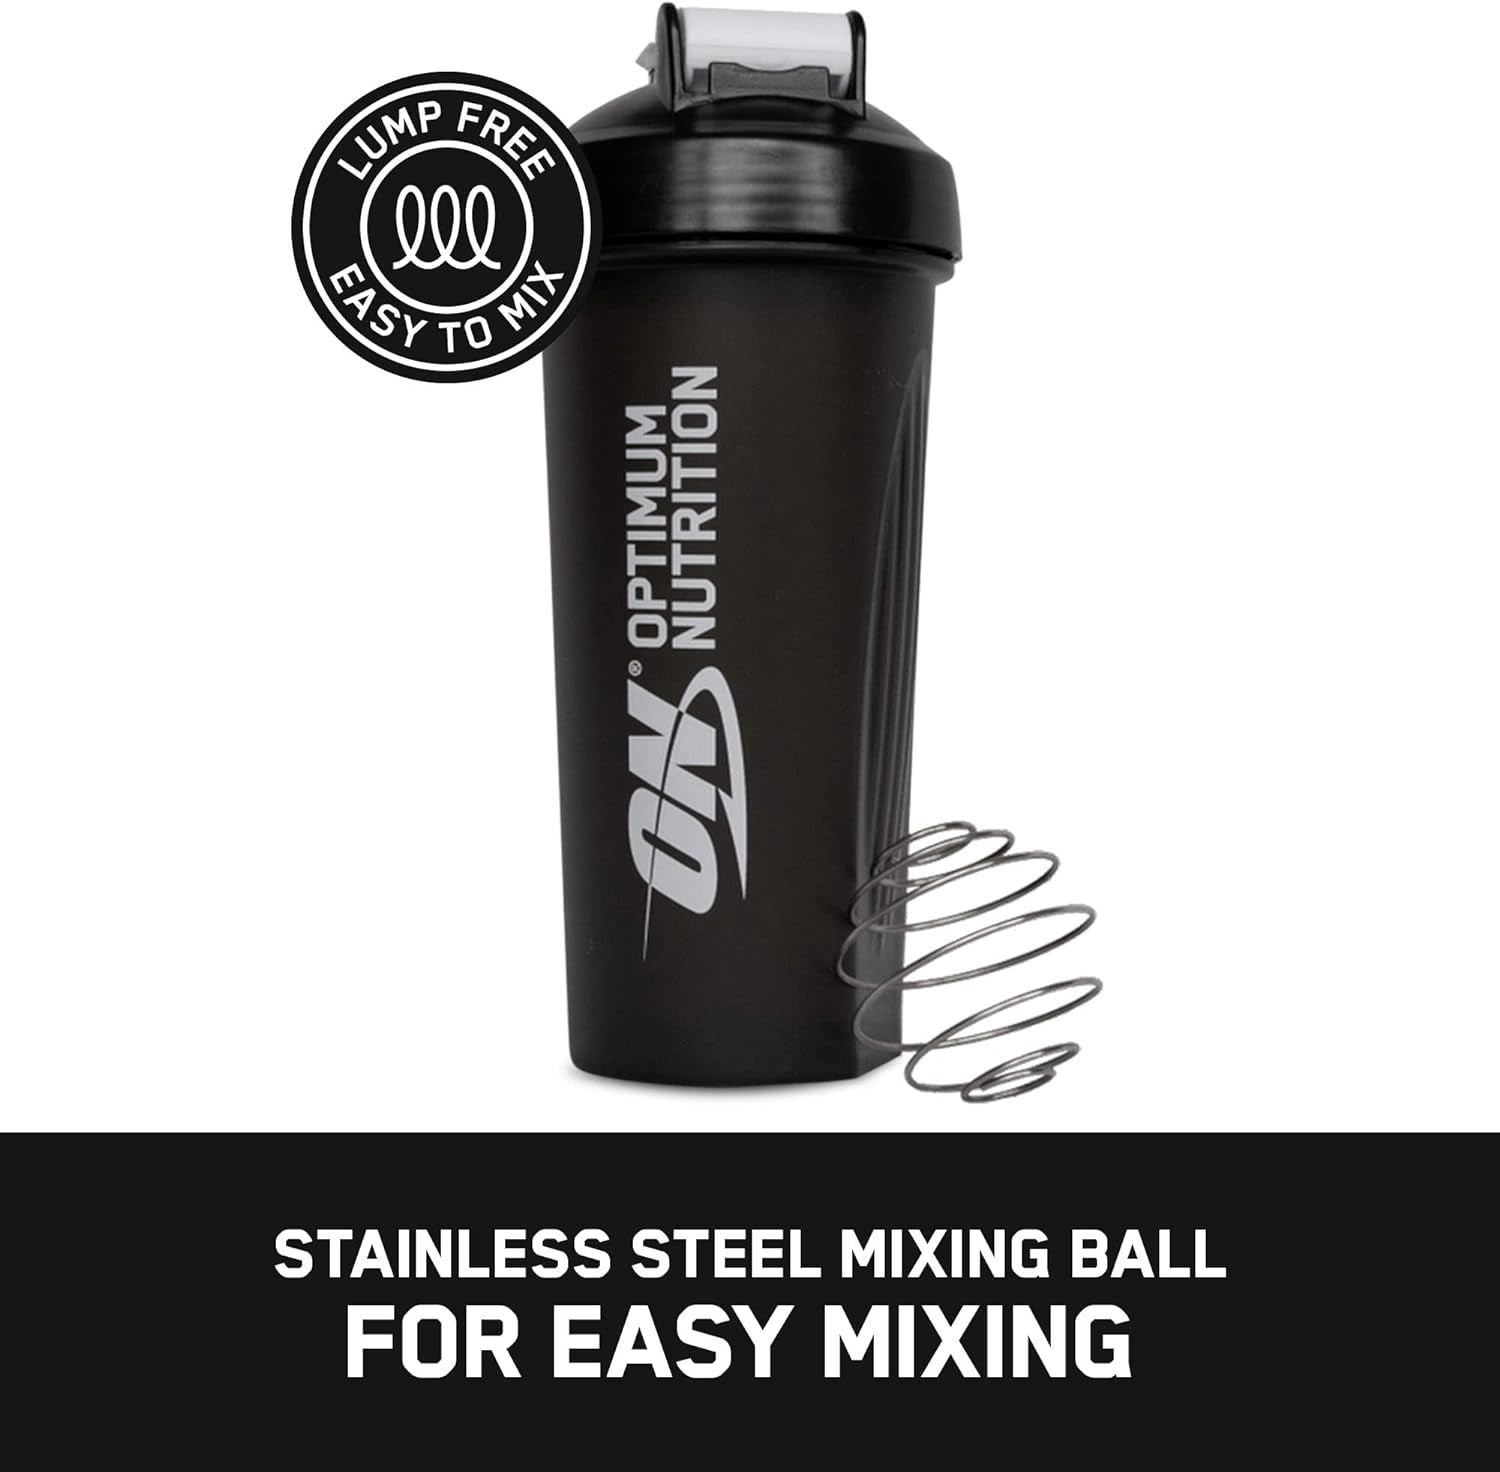 on Shaker with Stainless Steel Mixing Ball, BPA- and Dehp-Free, Dishwasher Safe, Black, 600 Ml